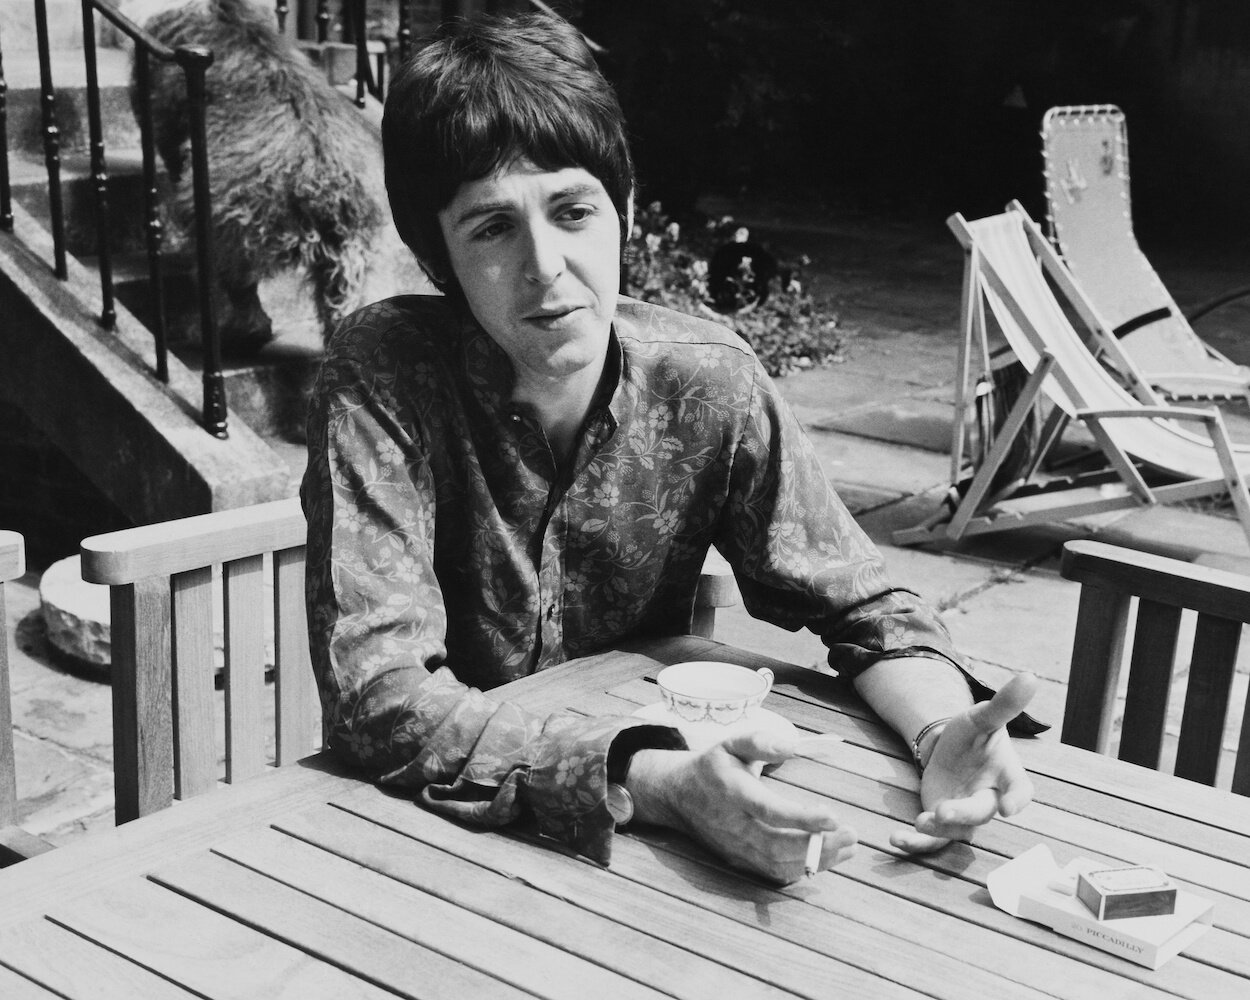 Beatles bassist Paul McCartney sitting at an outdoor table while wearing a floral-patterned shirt and smoking a cigarette in 1967.